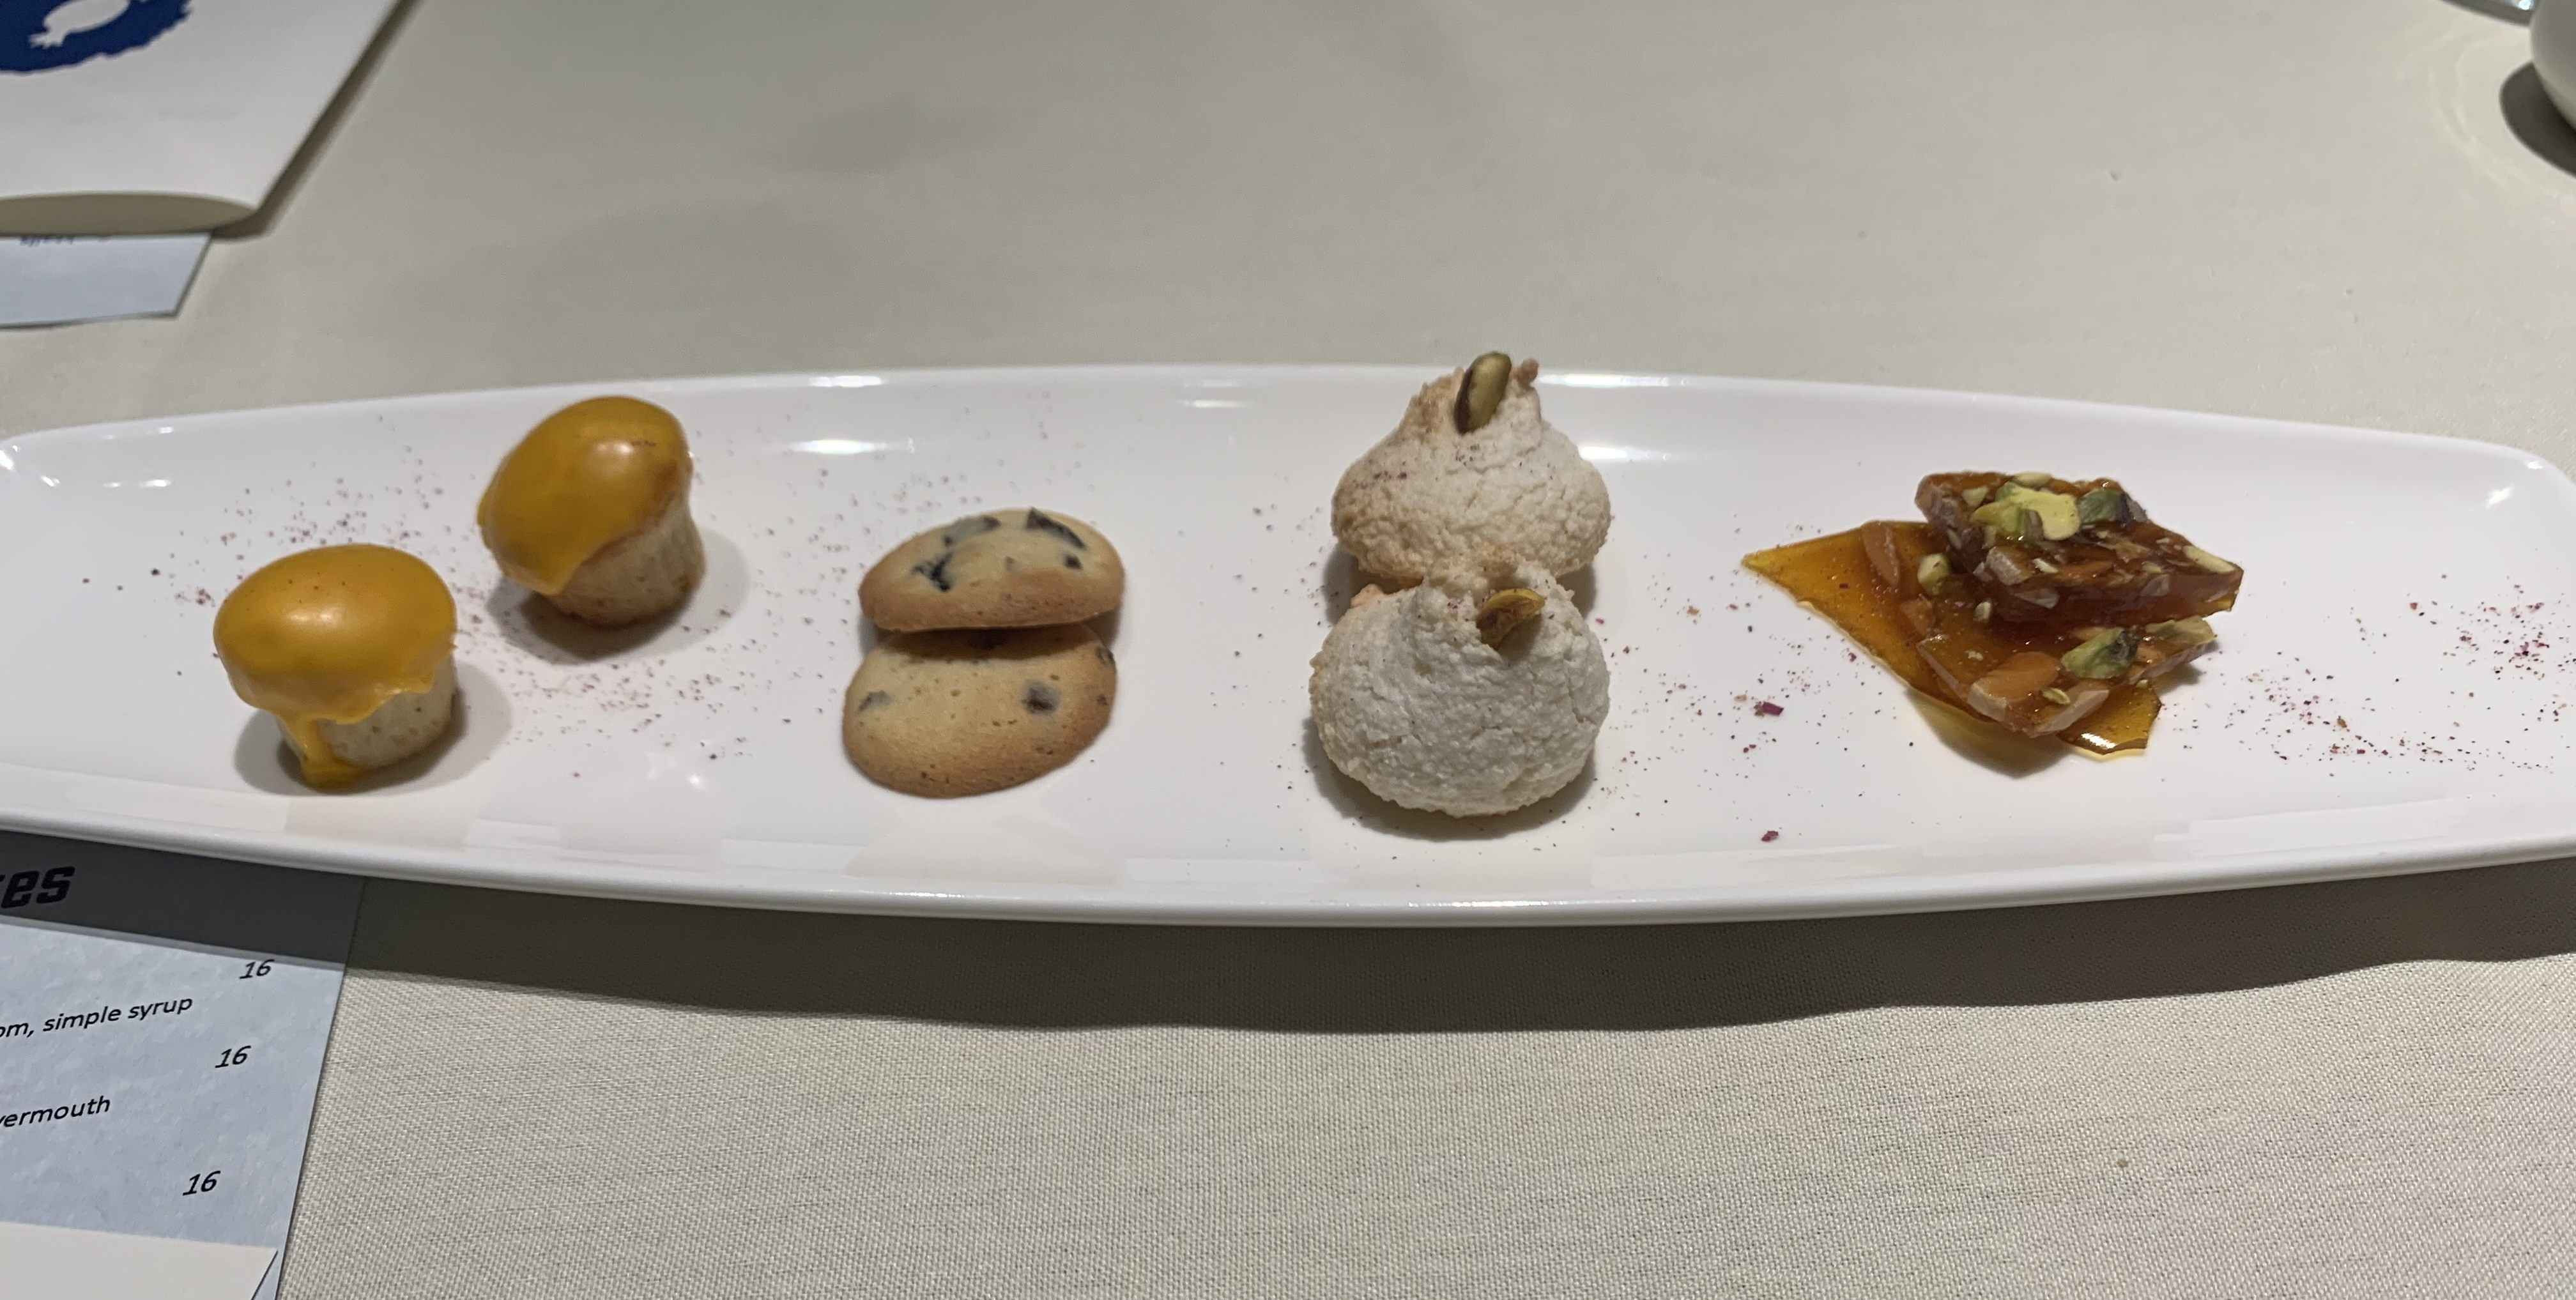 Plate with four confections: a muffin-looking thing with a golden glaze on top, a typical cookie, a cookie that looks like it has powdered sugar all over it, and translucent amber bark with nuts embedded in it.